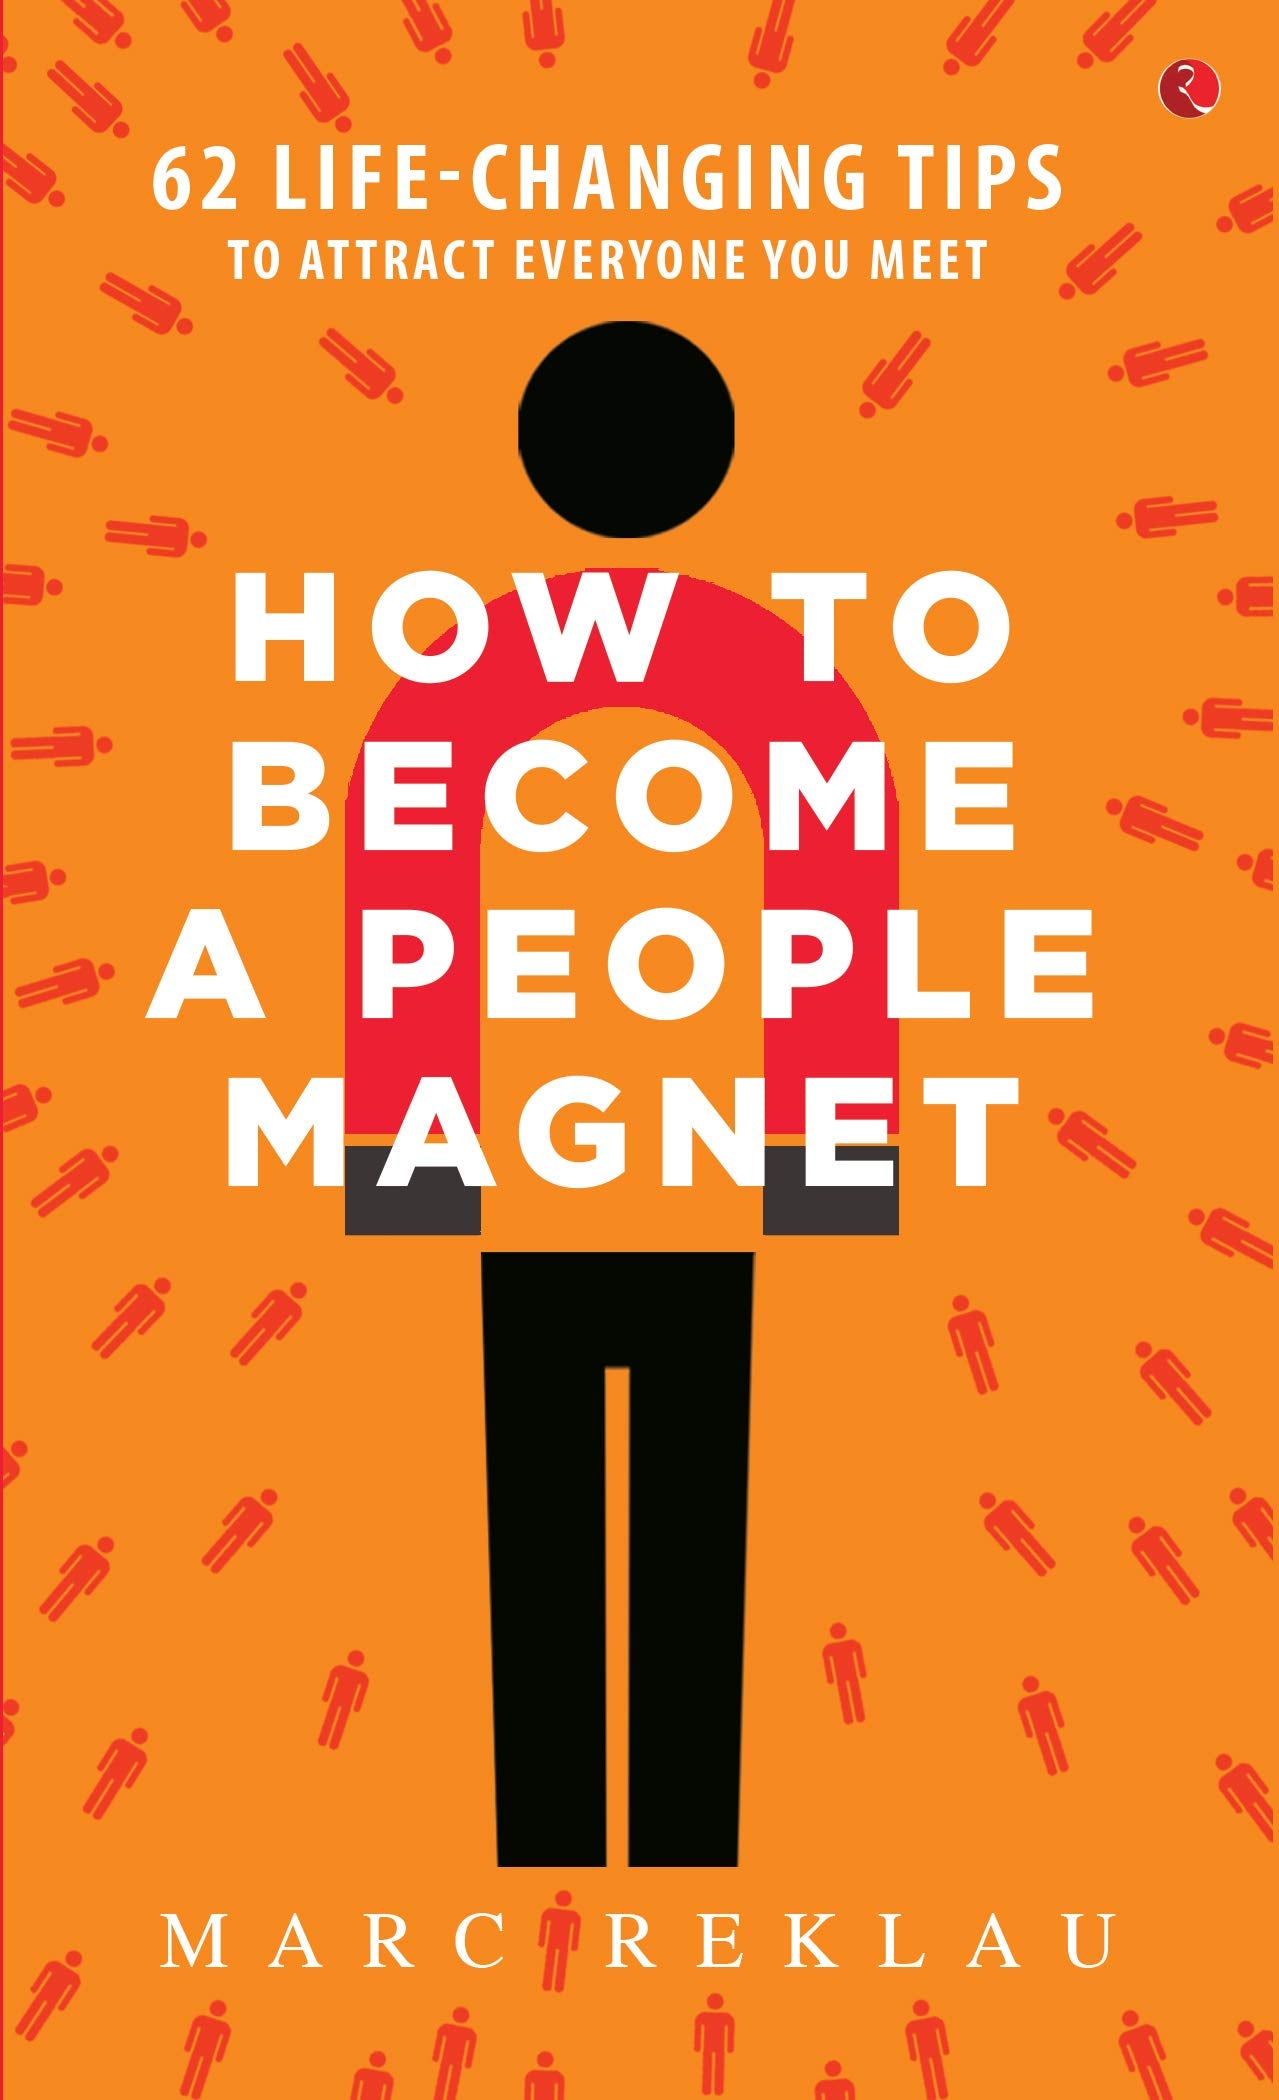 HOW TO BECOME A PEOPLE MAGNET by MARC REKLAU